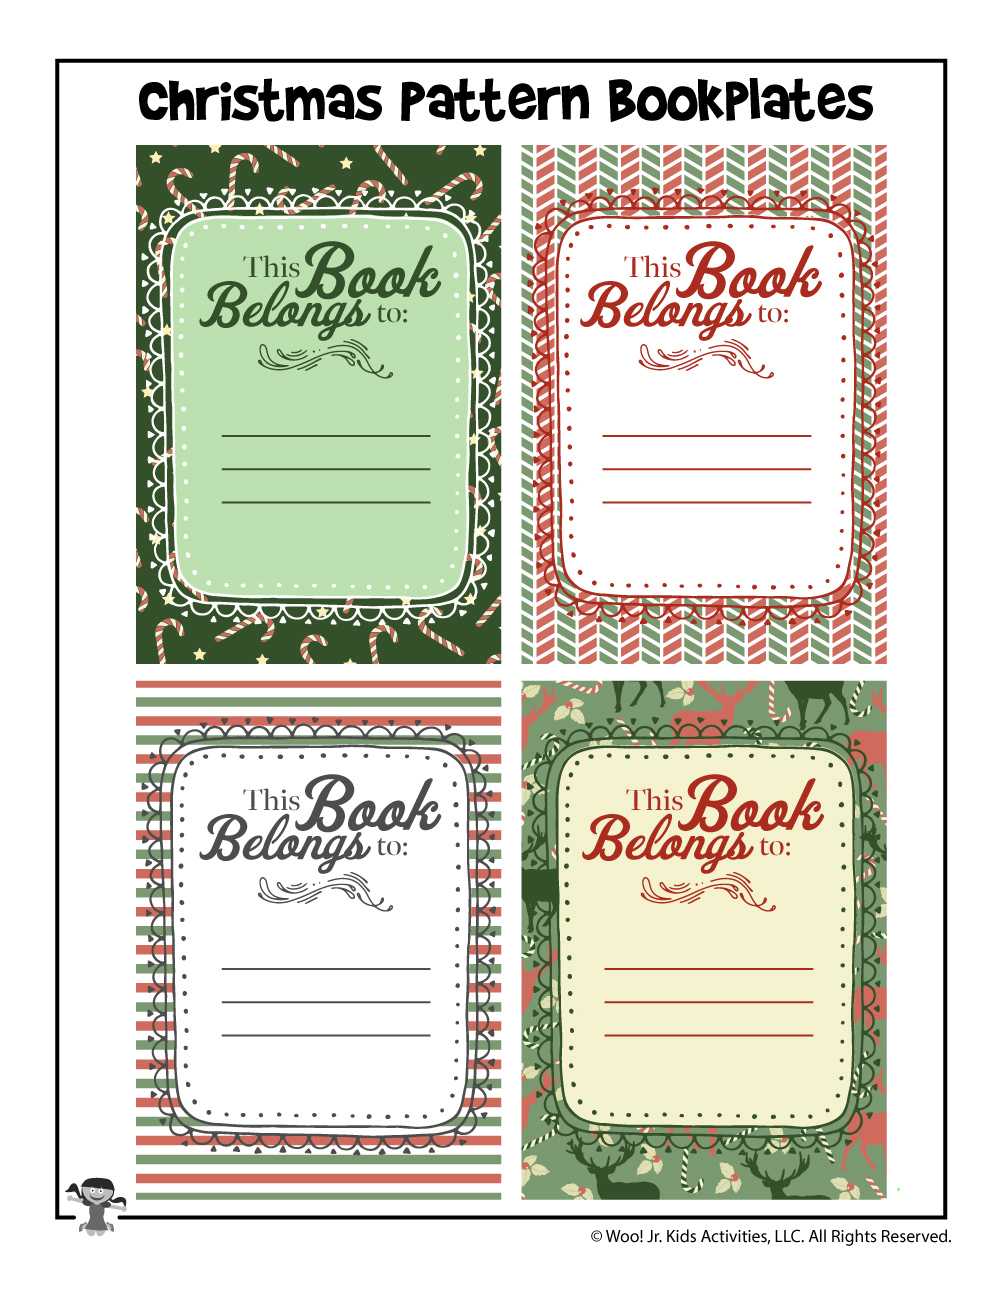 Christmas Gift Printable Bookplates | Woo! Jr. Kids Activities Within Bookplate Templates For Word